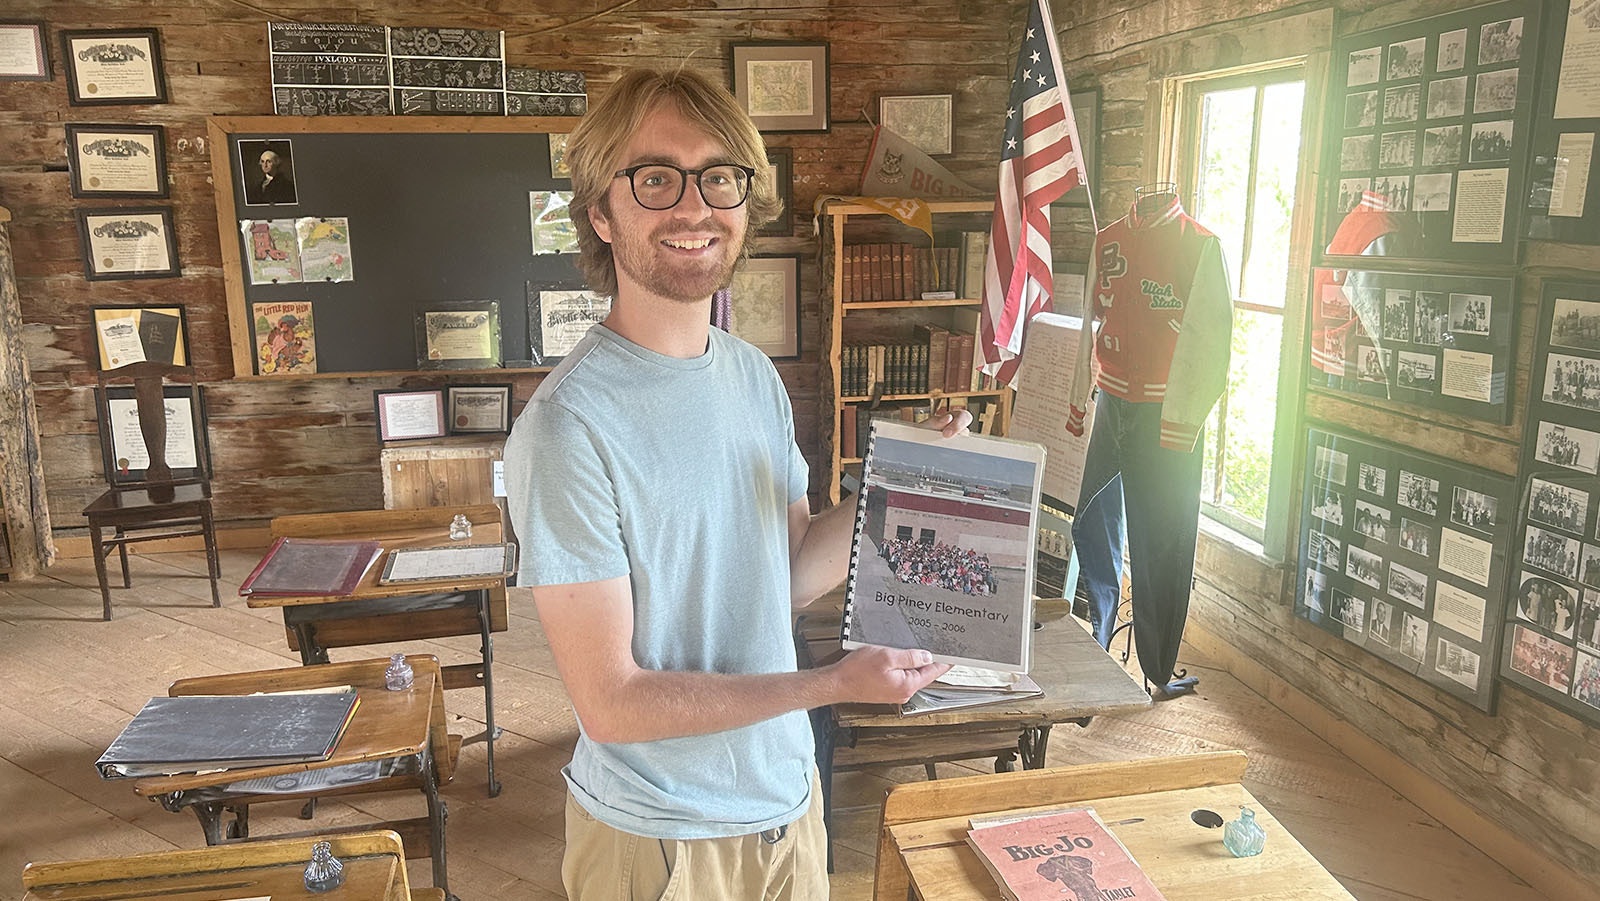 Buck Bell shows his Big Piney Elementary Yearbook from 2005. Bell is assistant manager at the Green River Valley Museum and the yearbook is on display inside the Price / Sommers Schoolhouse, an exhibit at the museum.